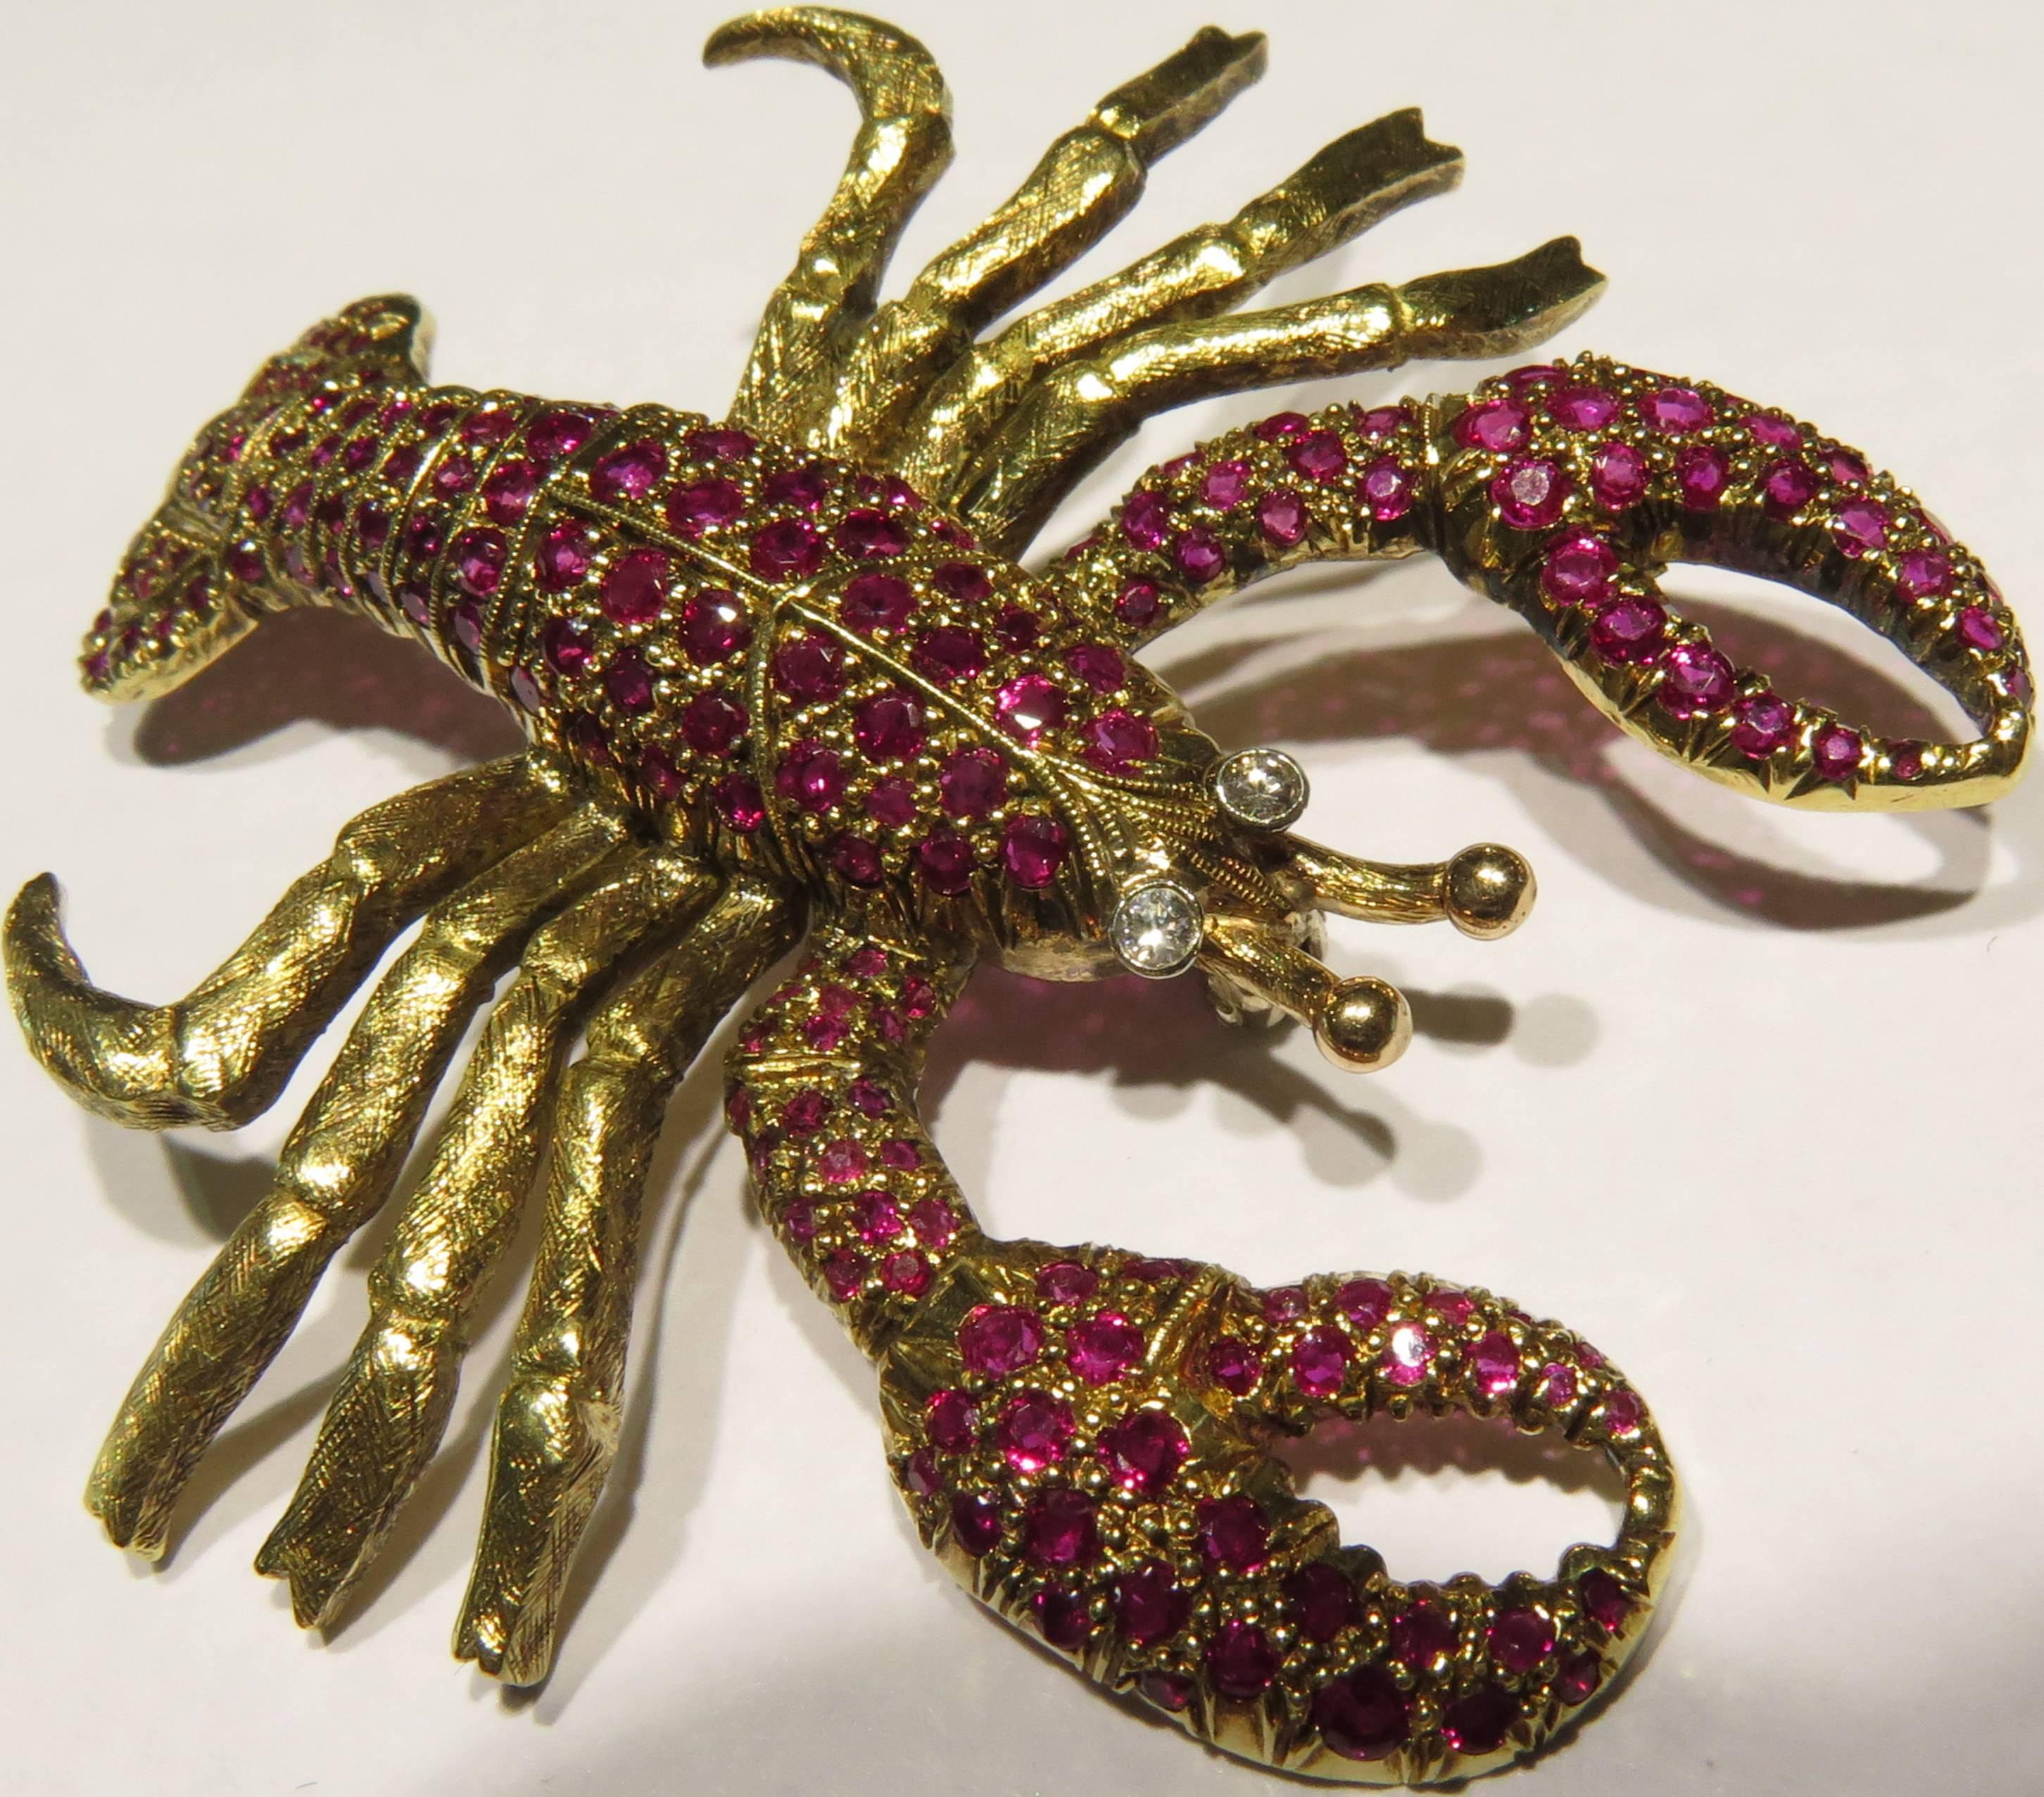 This luscious lobster is thrilled to be spared from your plate and is all about showing off your lapel. It is set in 18k gold and has a brushed type textures to his thick yummy little legs. (Can you tell I'm a New England girl?
This lobster weighs